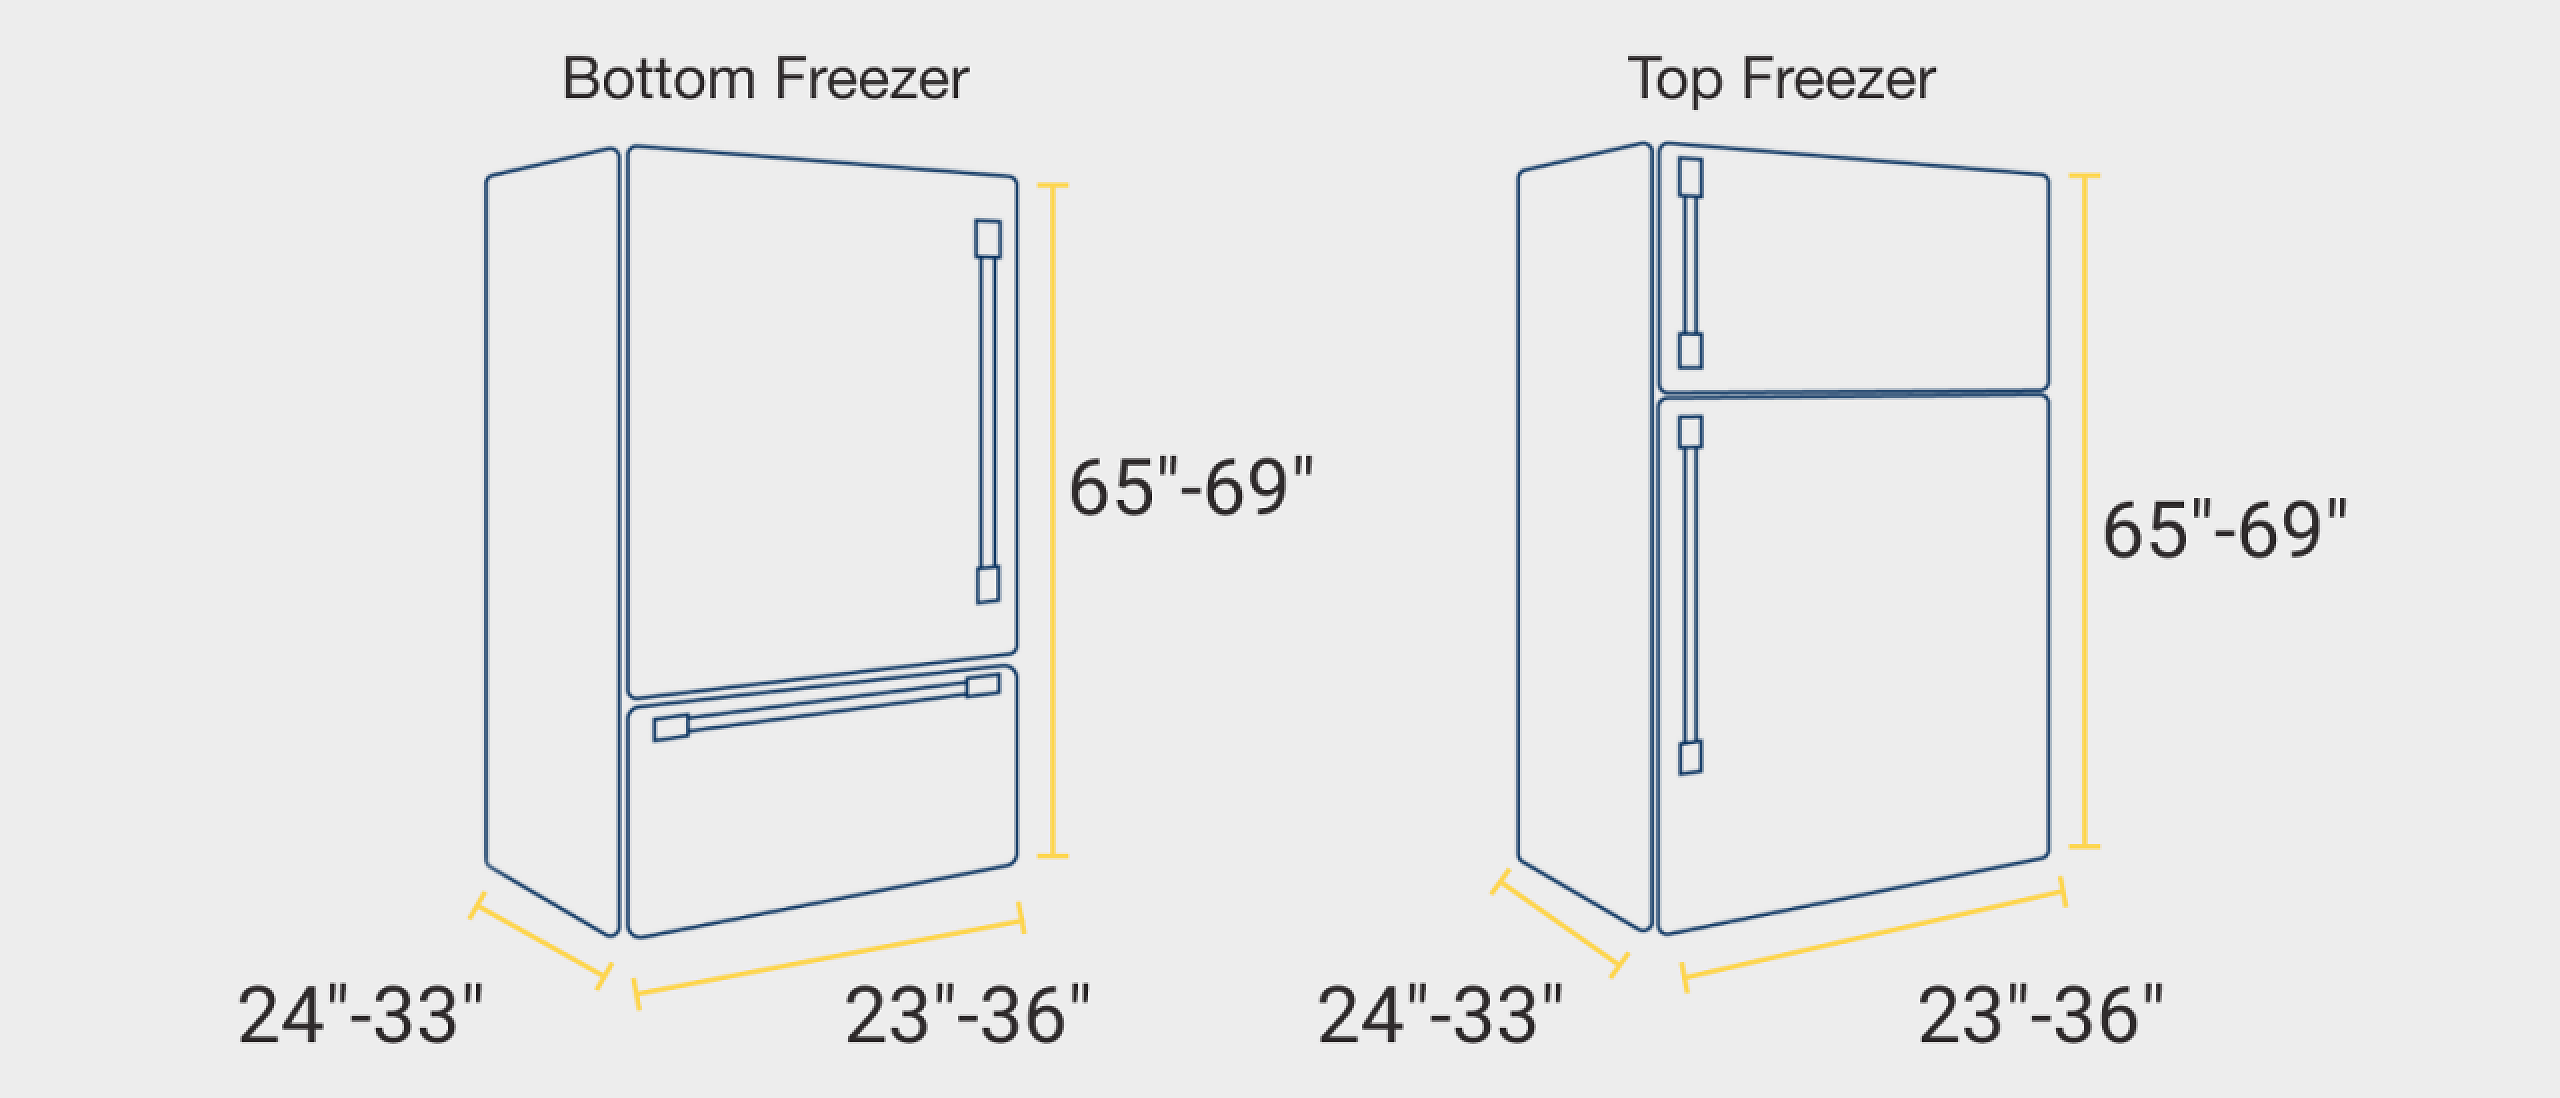 Guide To Refrigerator Sizes Dimensions Styles1 ?fmt=png Alpha&qlt=85,0&resMode=sharp2&op Usm=1.75,0.3,2,0&scl=1&constrain=fit,1